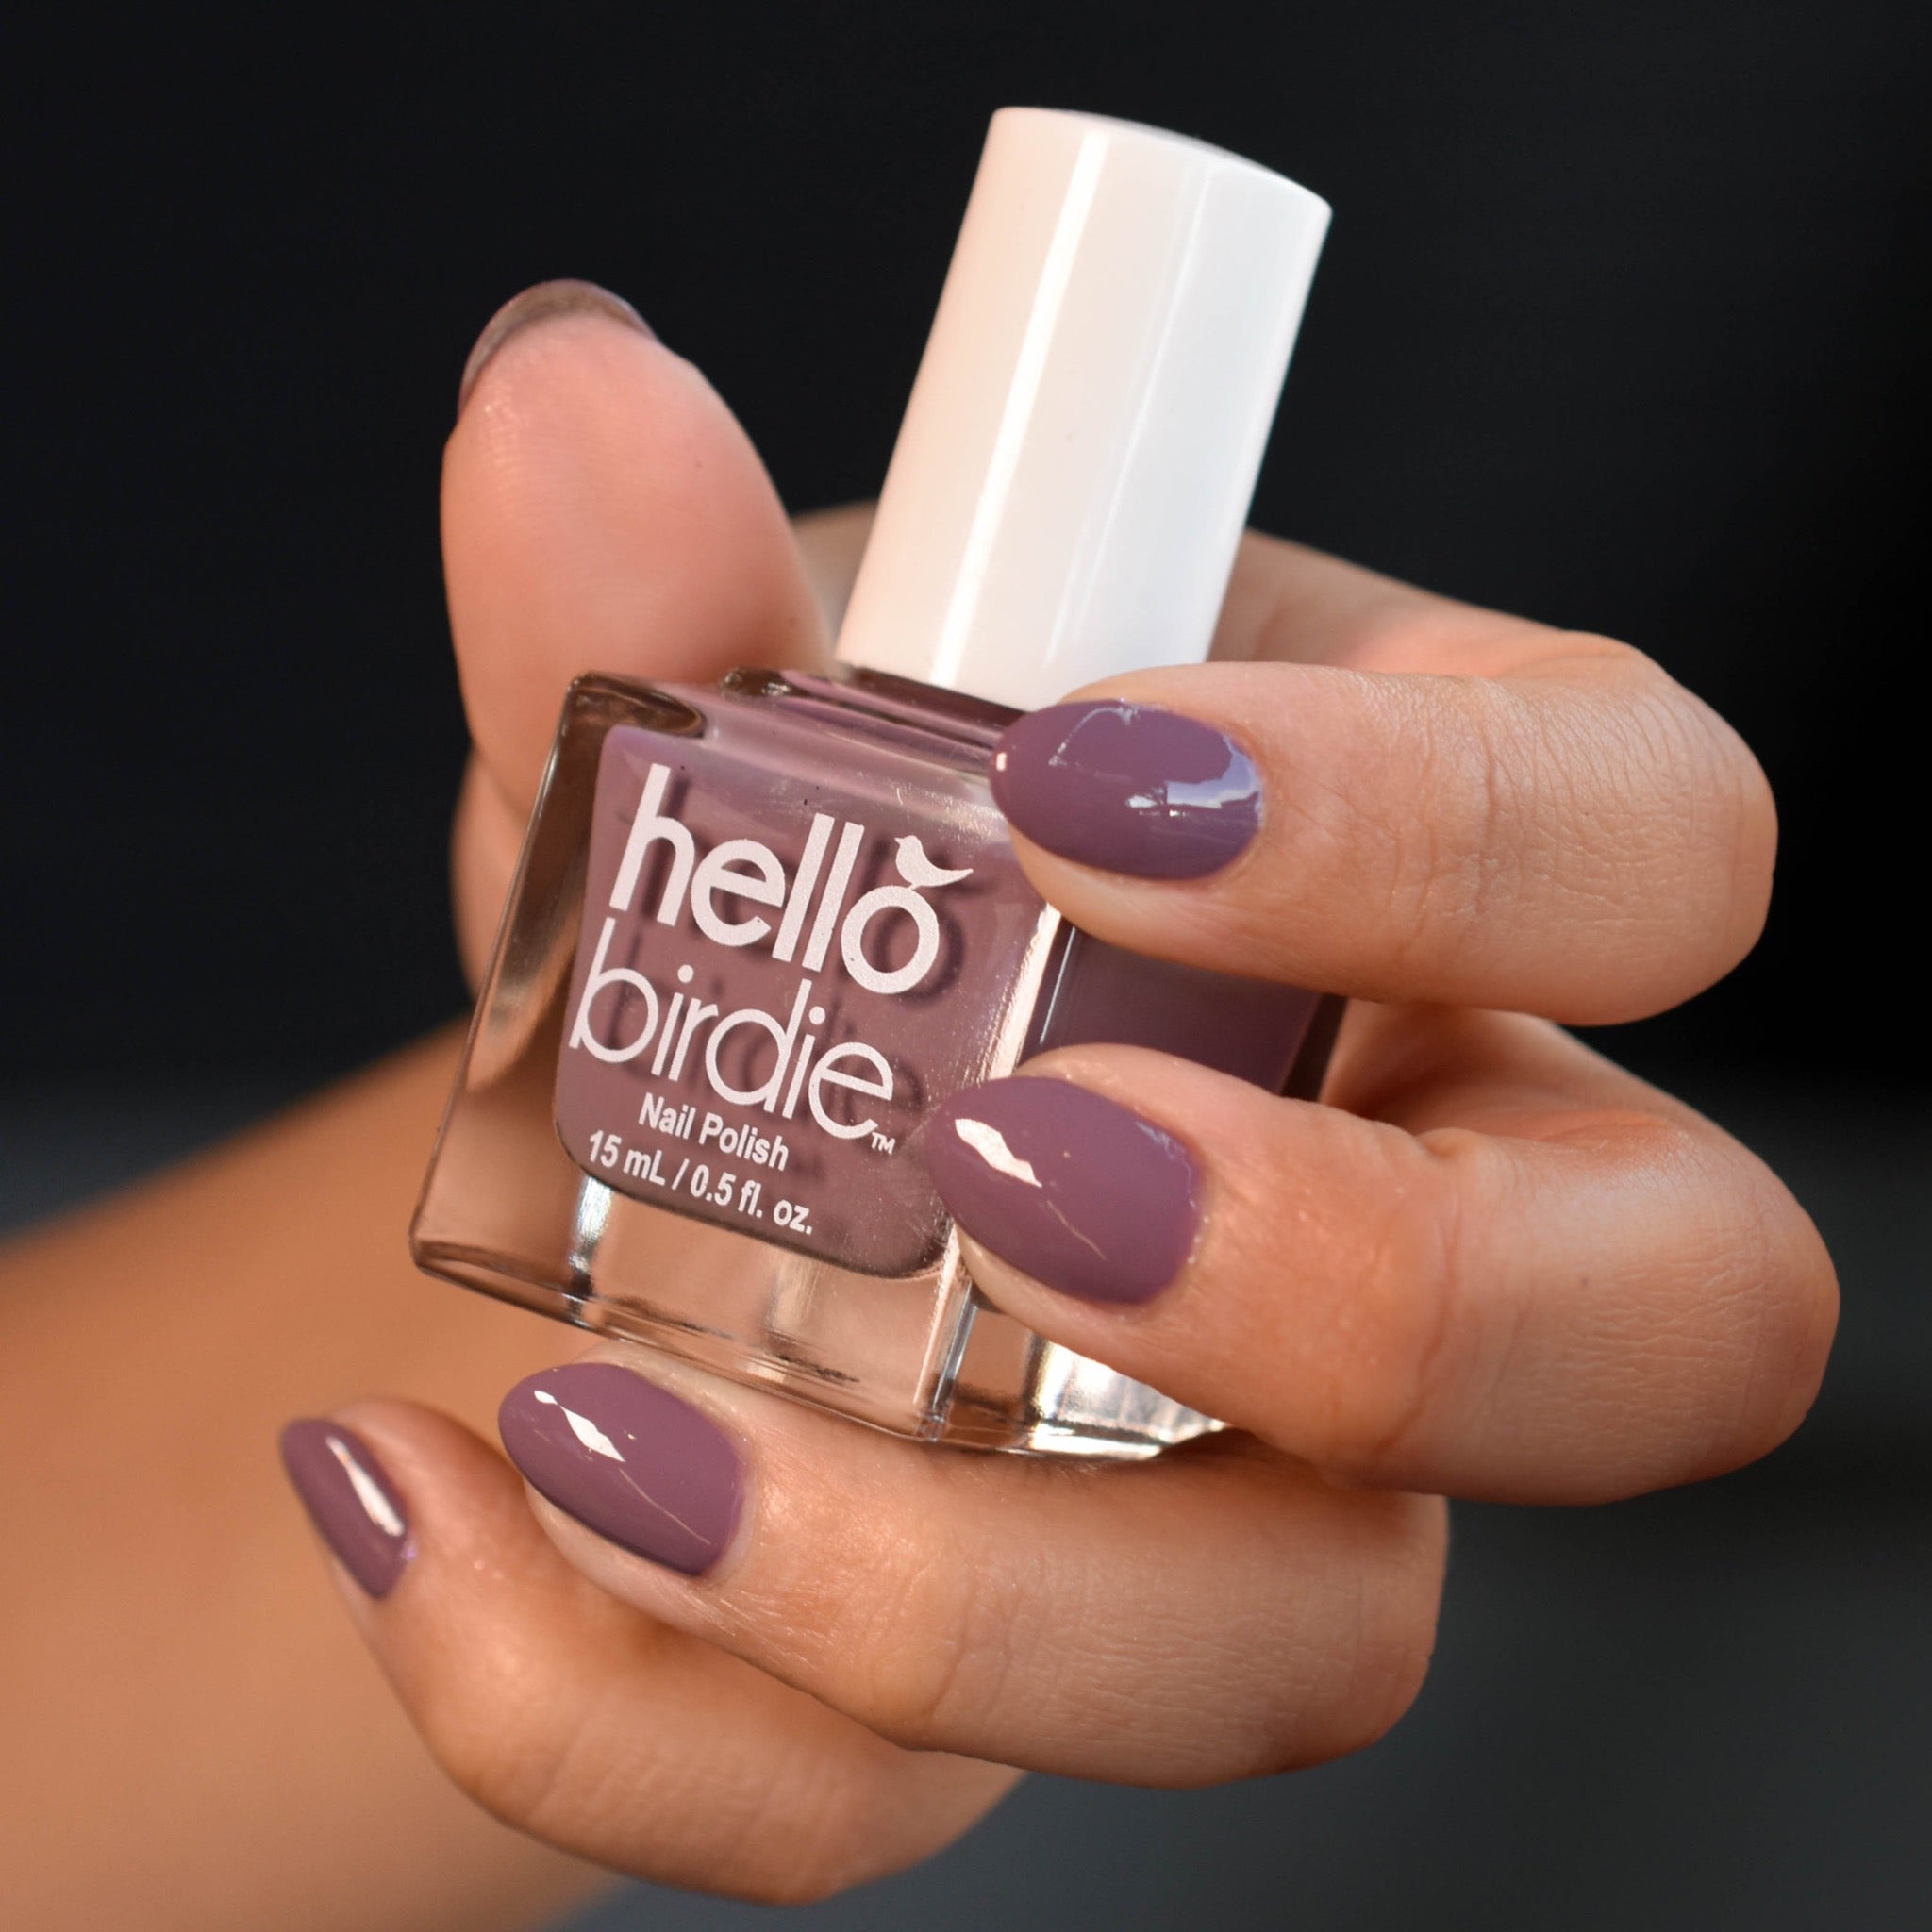 A close up of a medium toned hand clutching a bottle of Unpheasant  nail polish from Hello Birdie in a taupe purple. The nails are painted with the polish and are glossy against a soft black background.